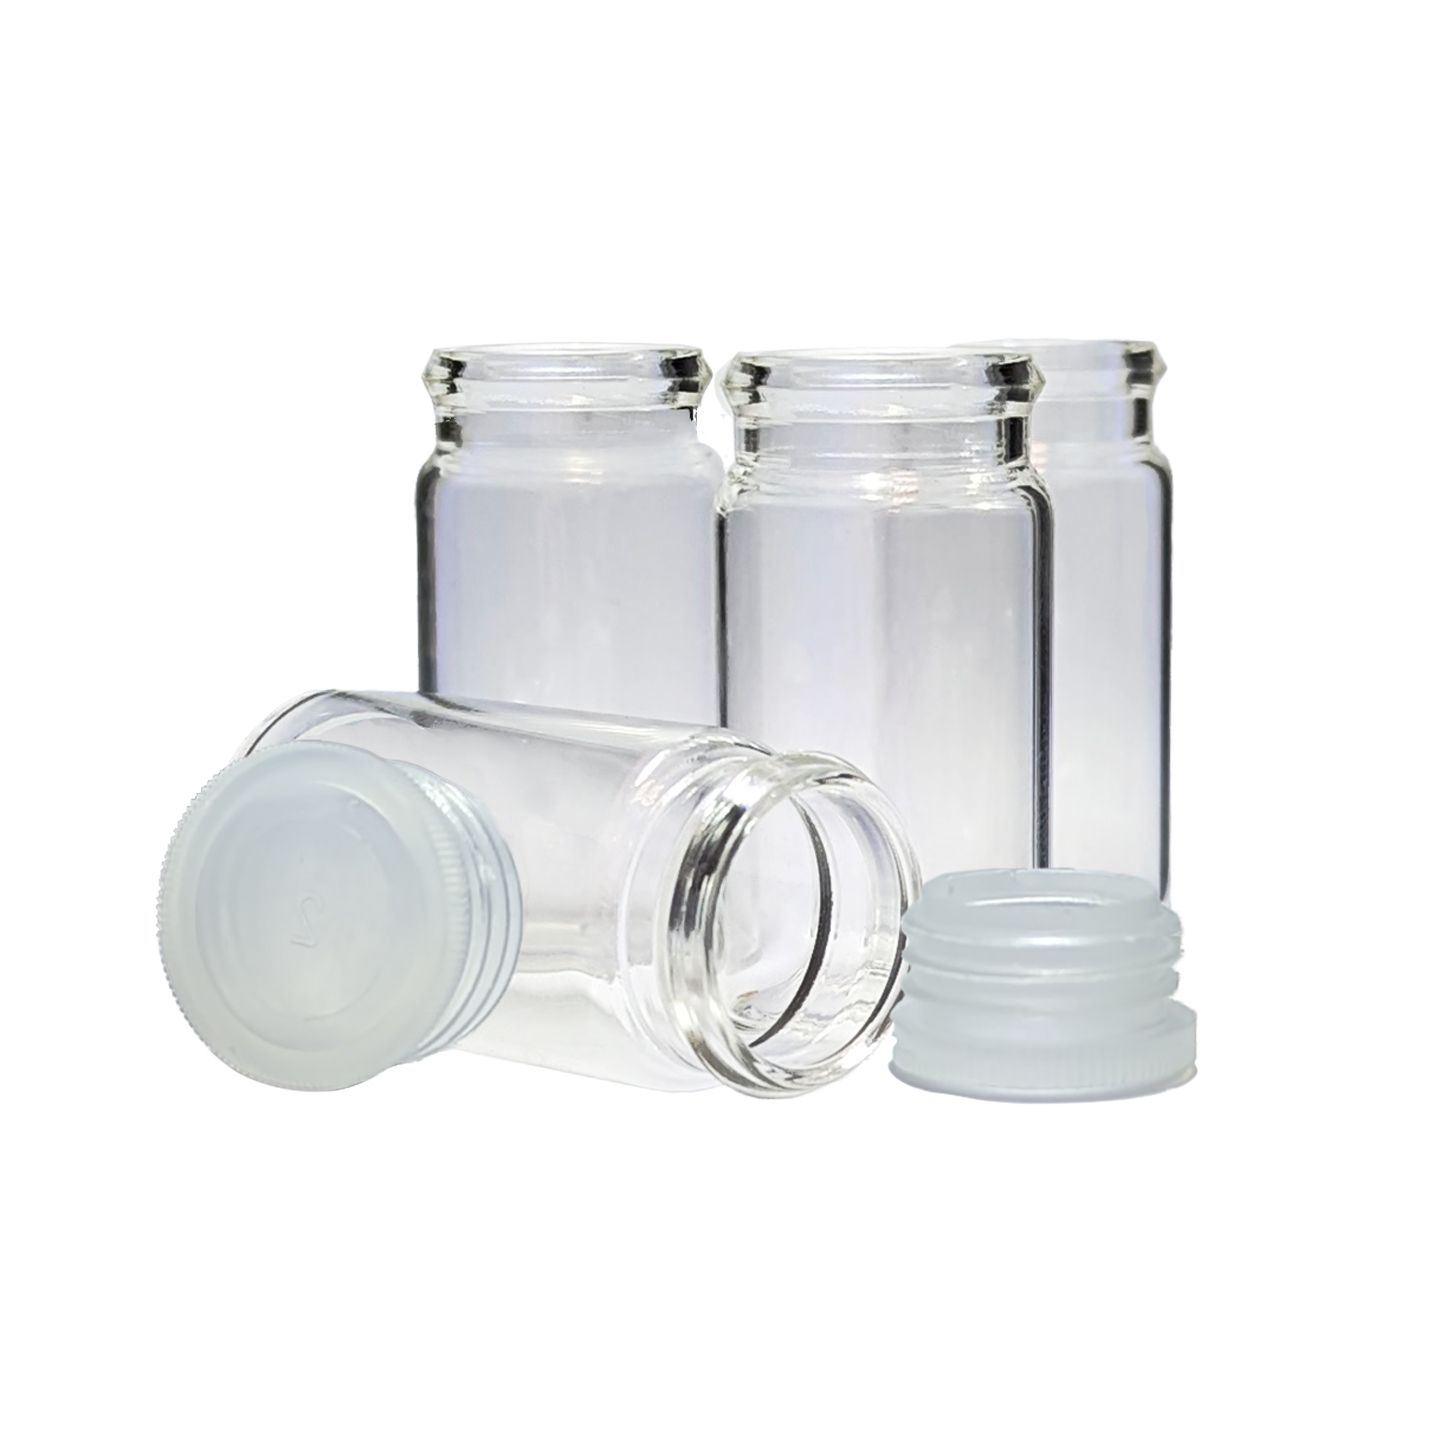 Vial, Rolled Rim Vials, Capacity 1.75ml, With Unattached Push In Closure